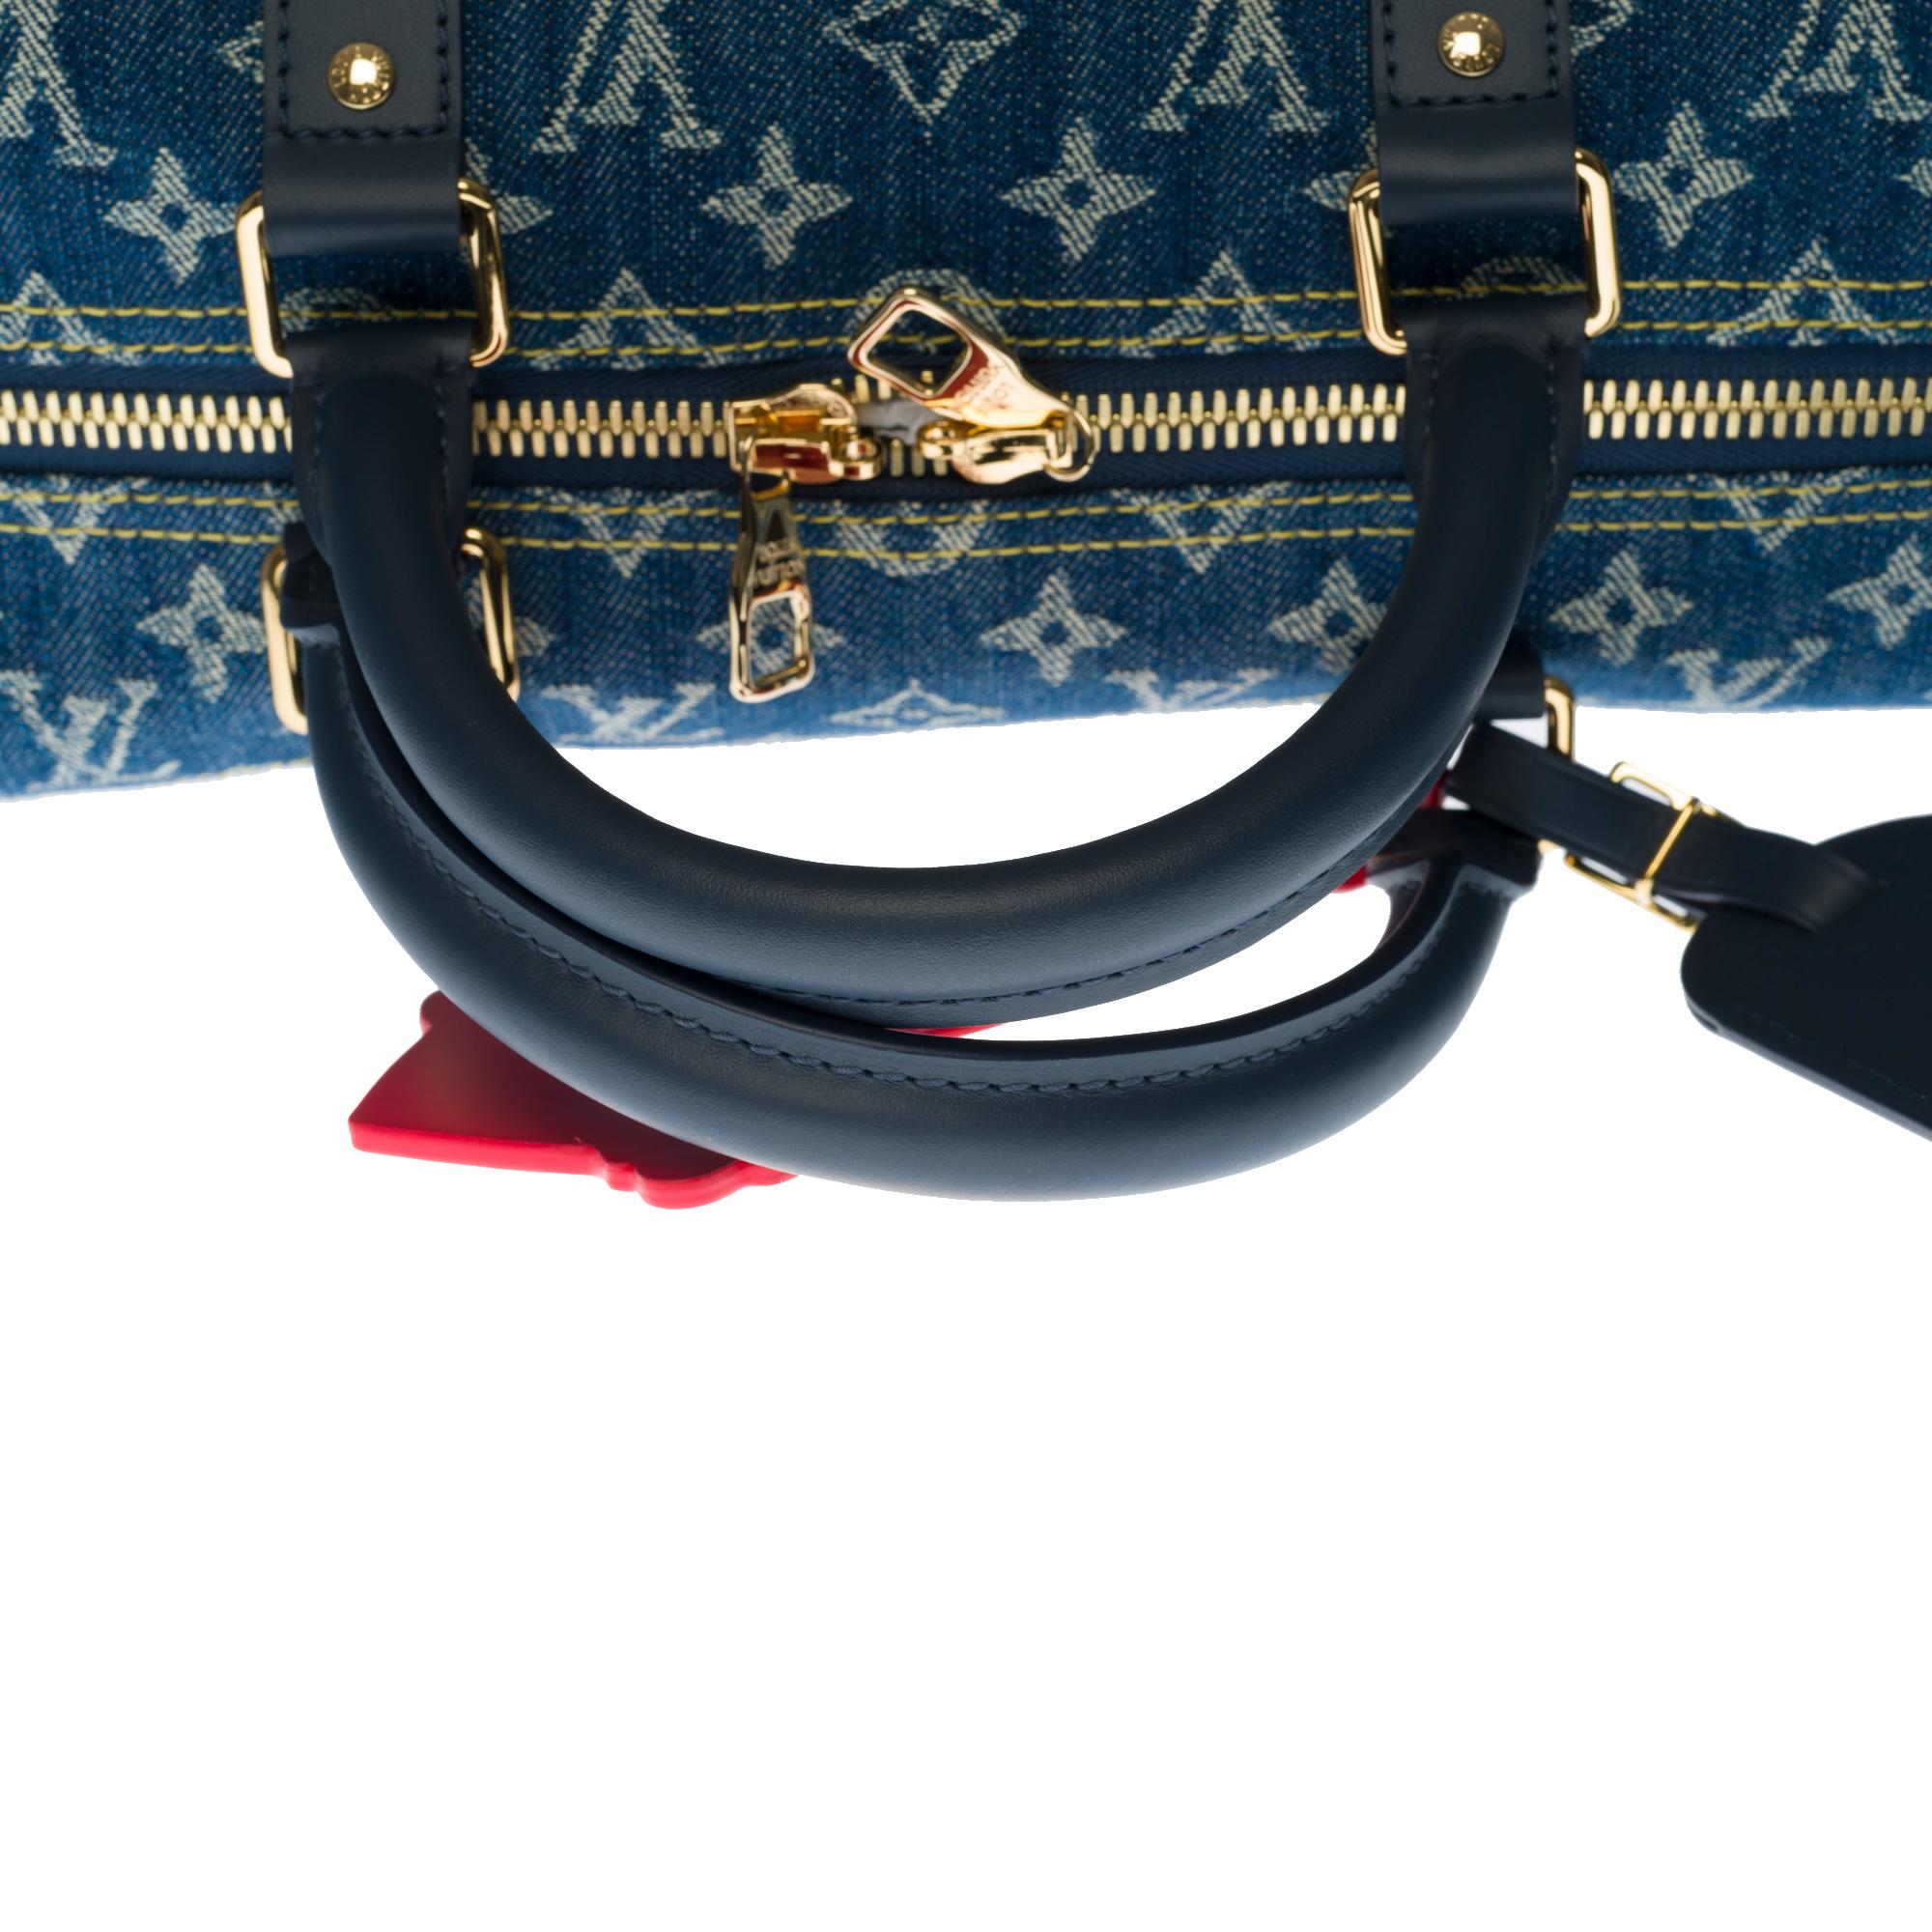 NEW-Louis Vuitton keepall 50 strap Travel bag in blue denim and 